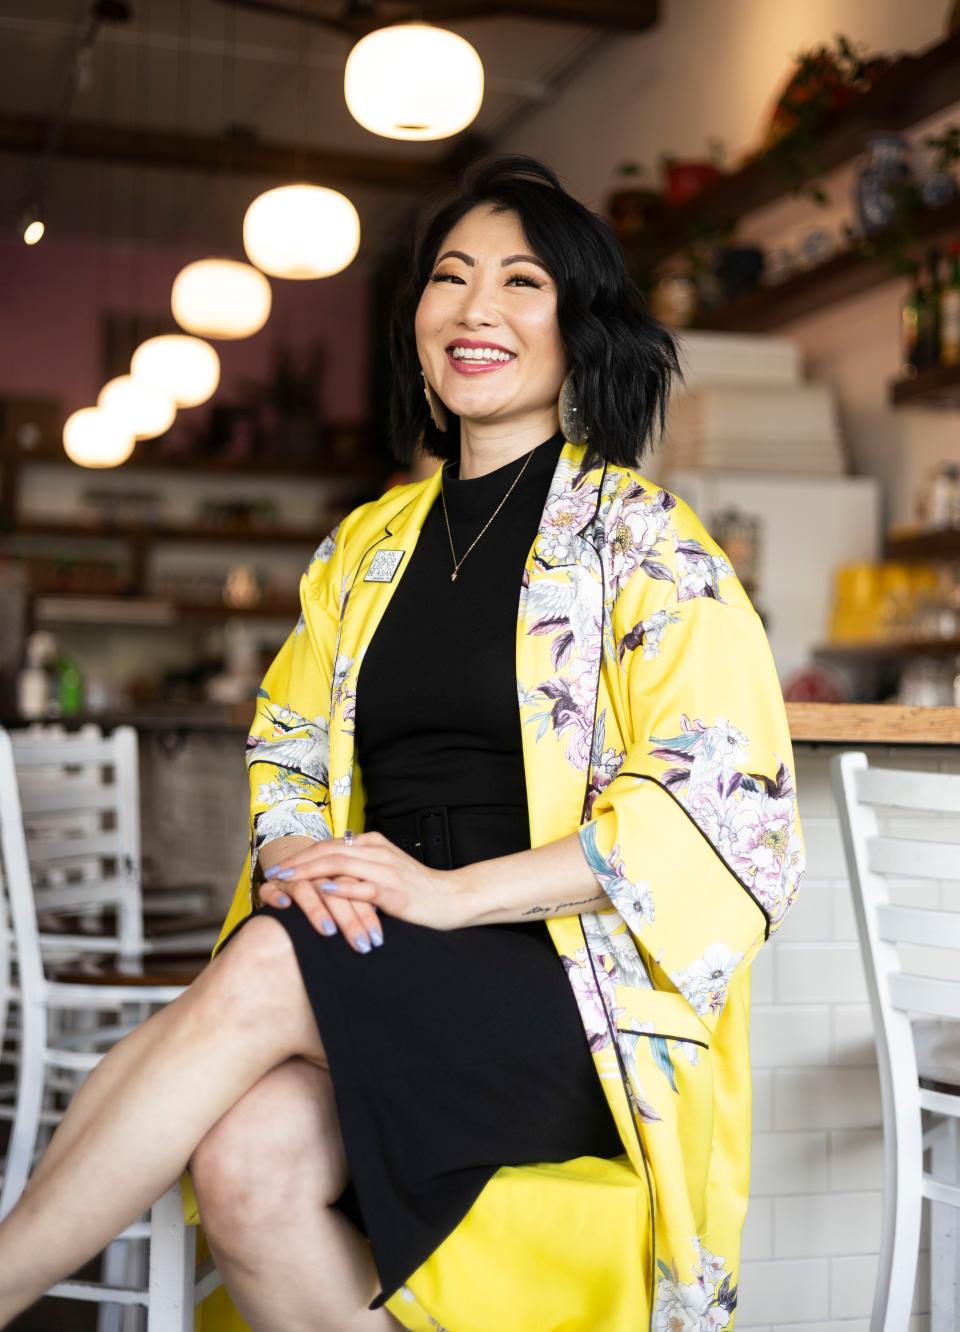 SunAh Laybourn is a University of Memphis sociology professor who led the charge to have Memphis-based programming during Asian American and Pacific Islander Heritage Month in Memphis for the first time this year. She poses for a portrait on May 24, 2023, at the bar inside of Good Fortune in Downtown Memphis.